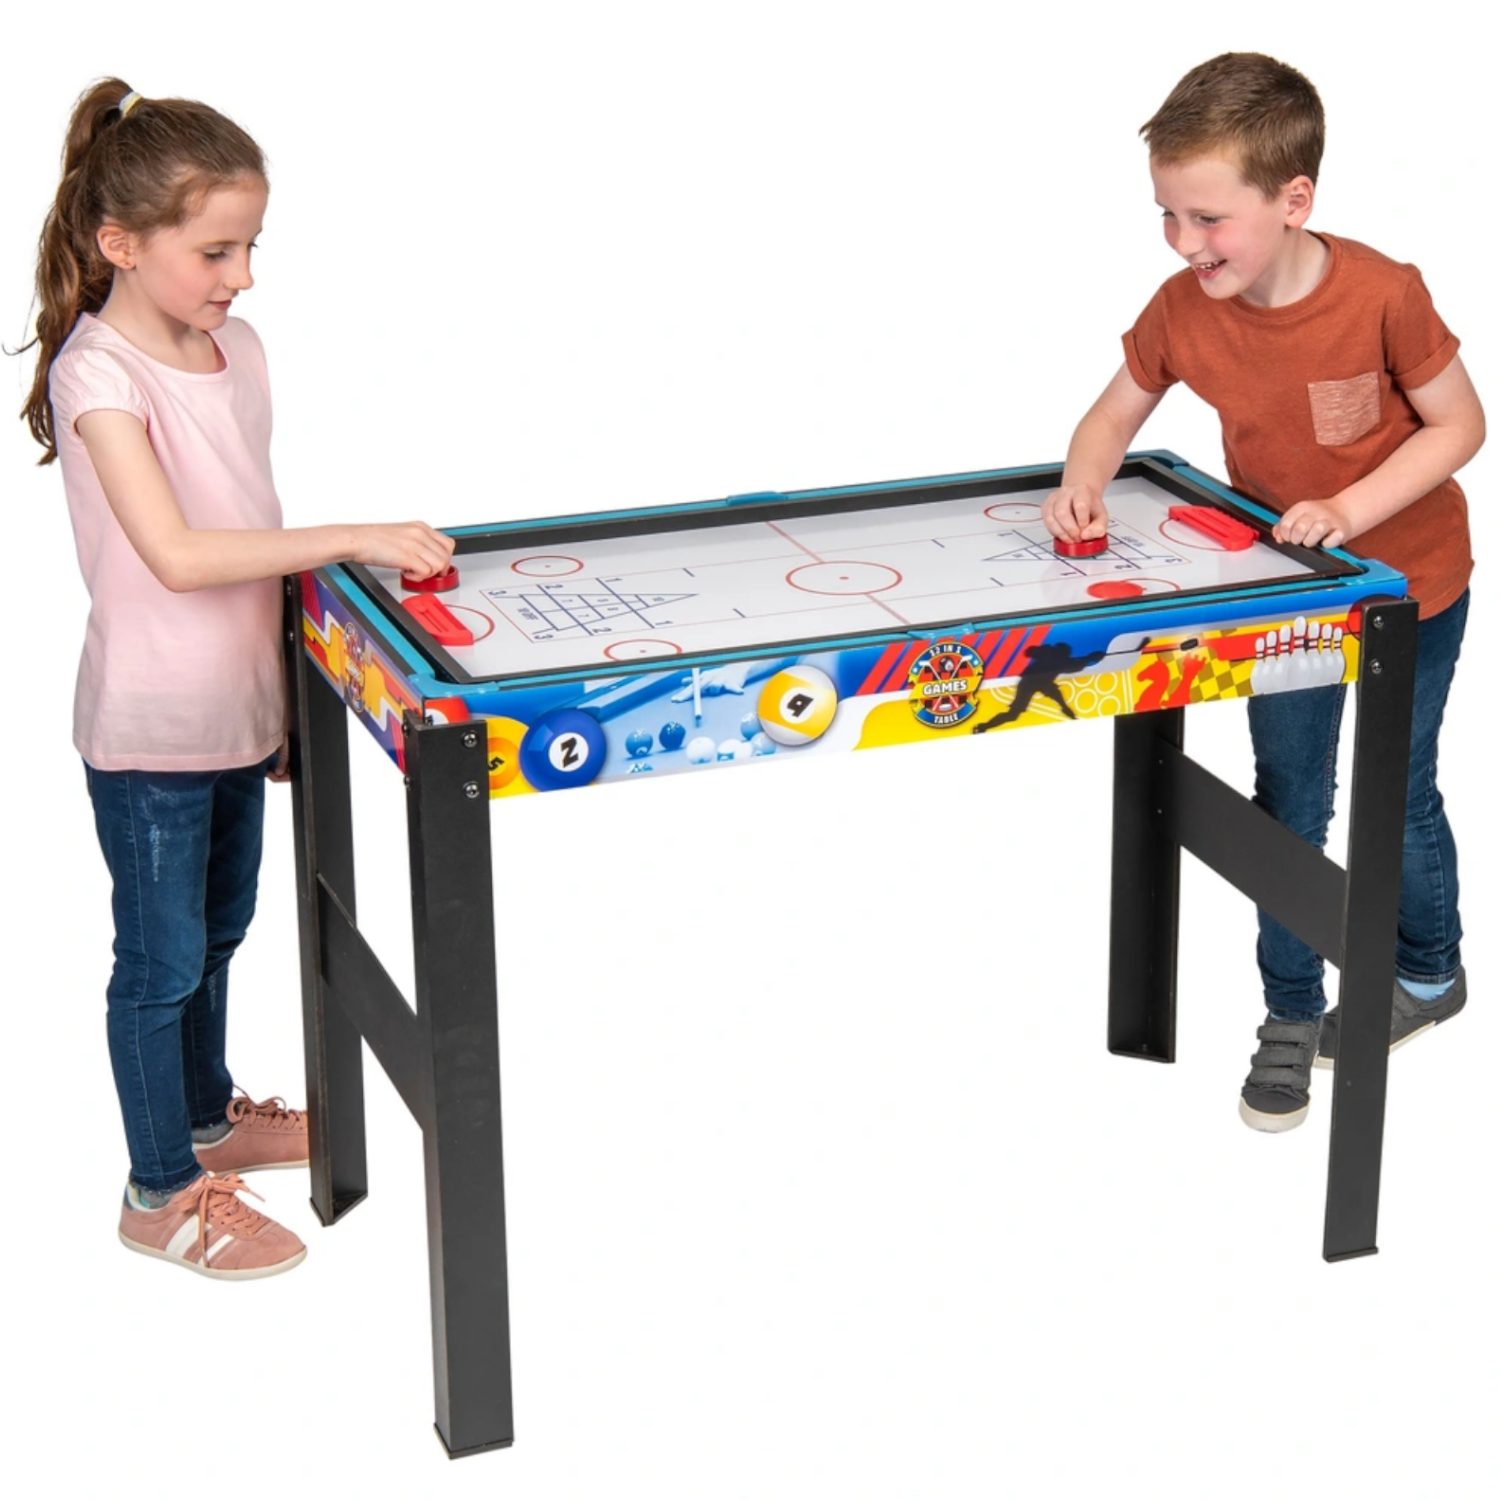 4FT 12IN1 Multi Game Table | Kids Entertainment